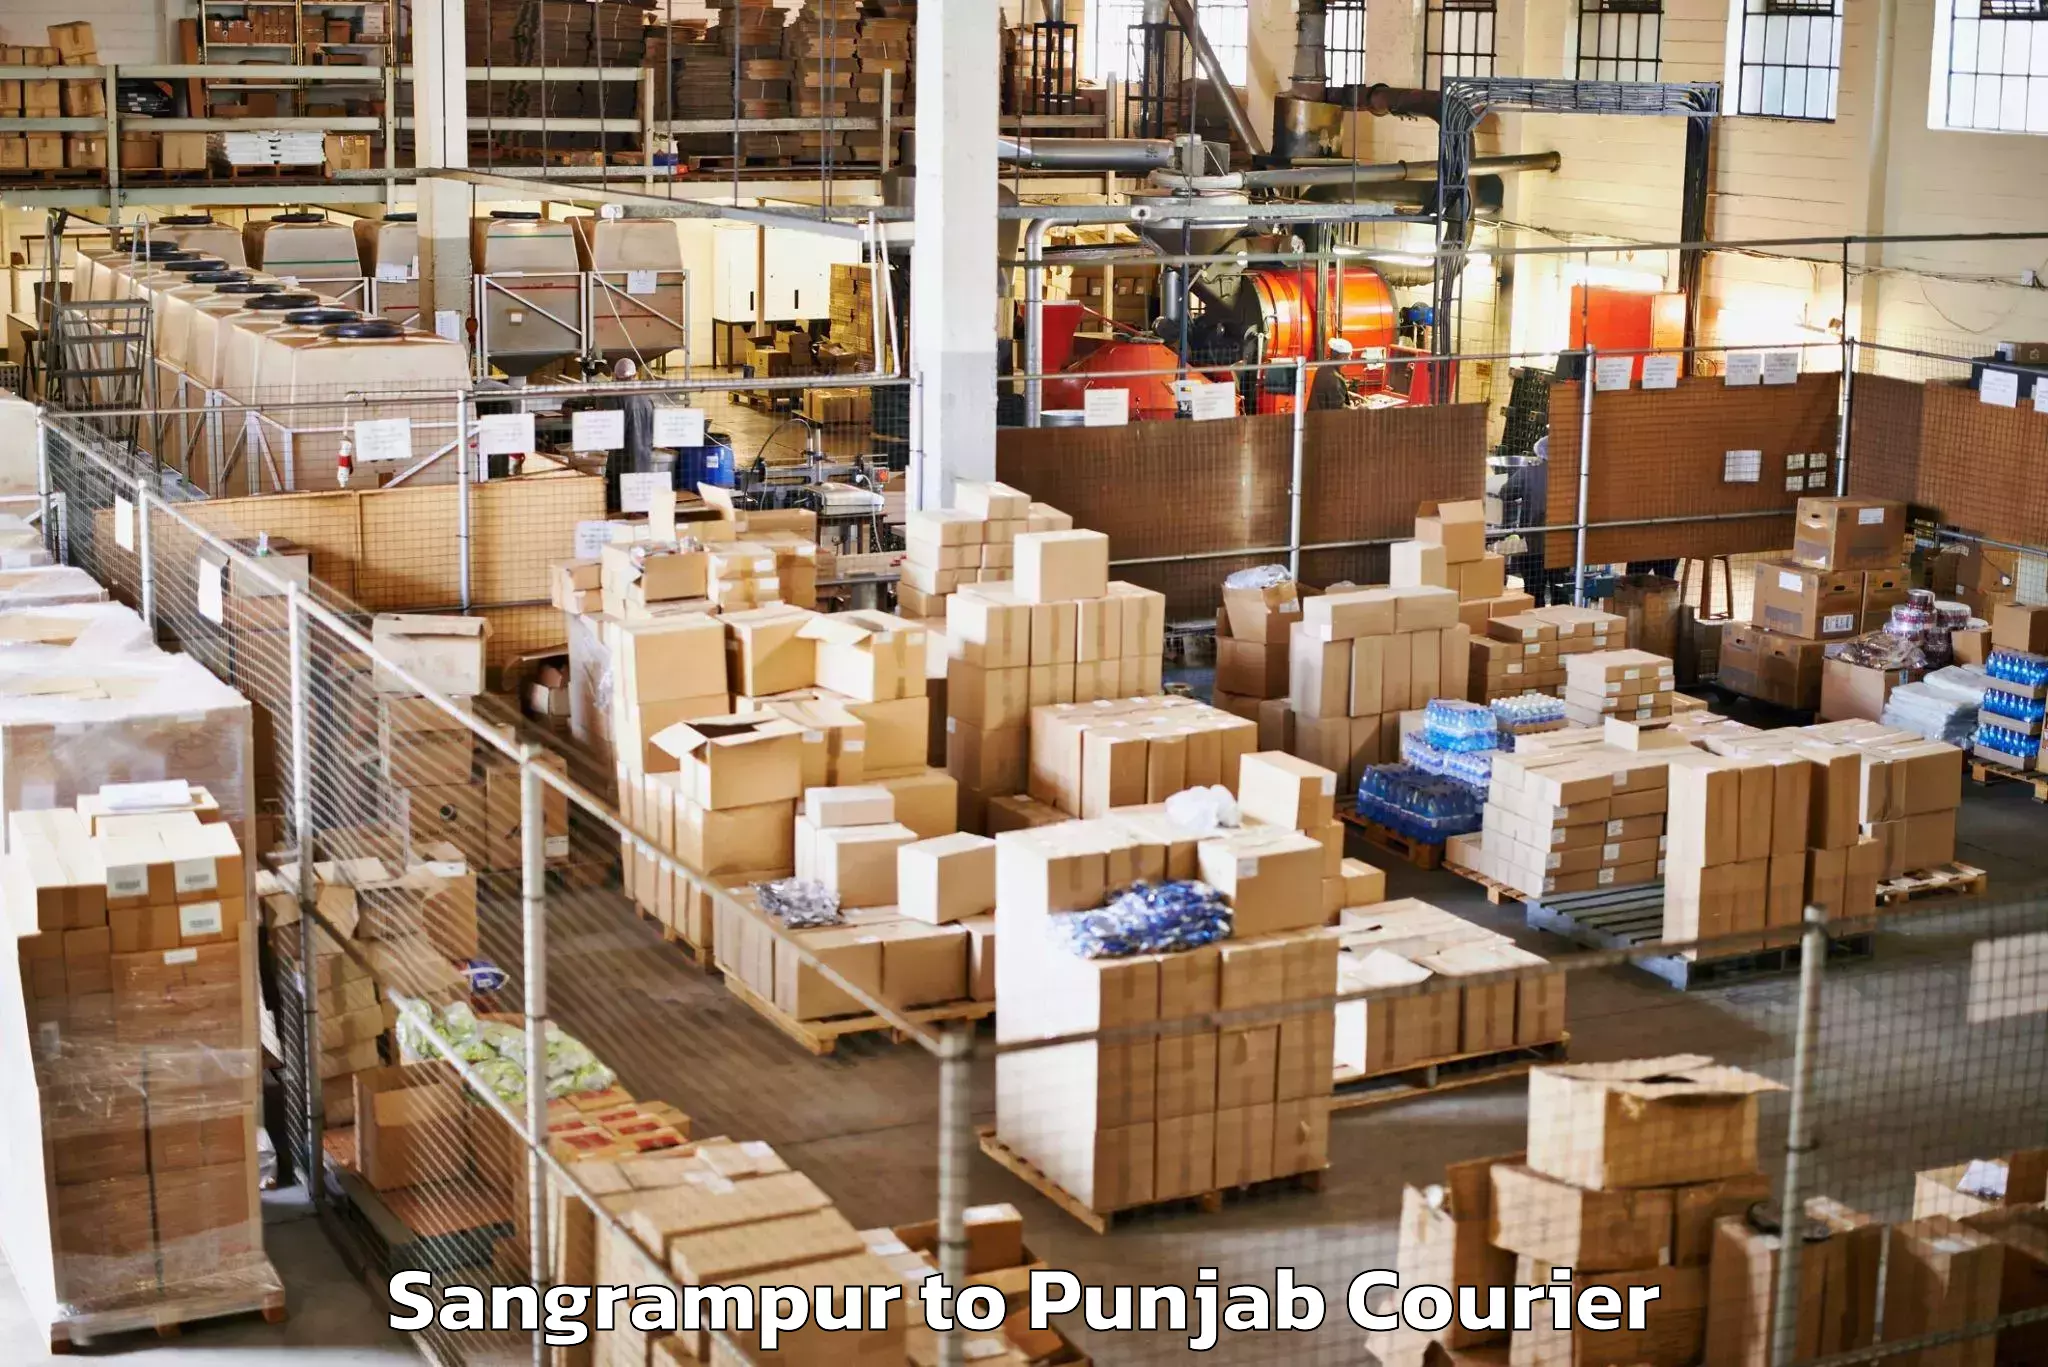 Luggage delivery estimate Sangrampur to Mohali